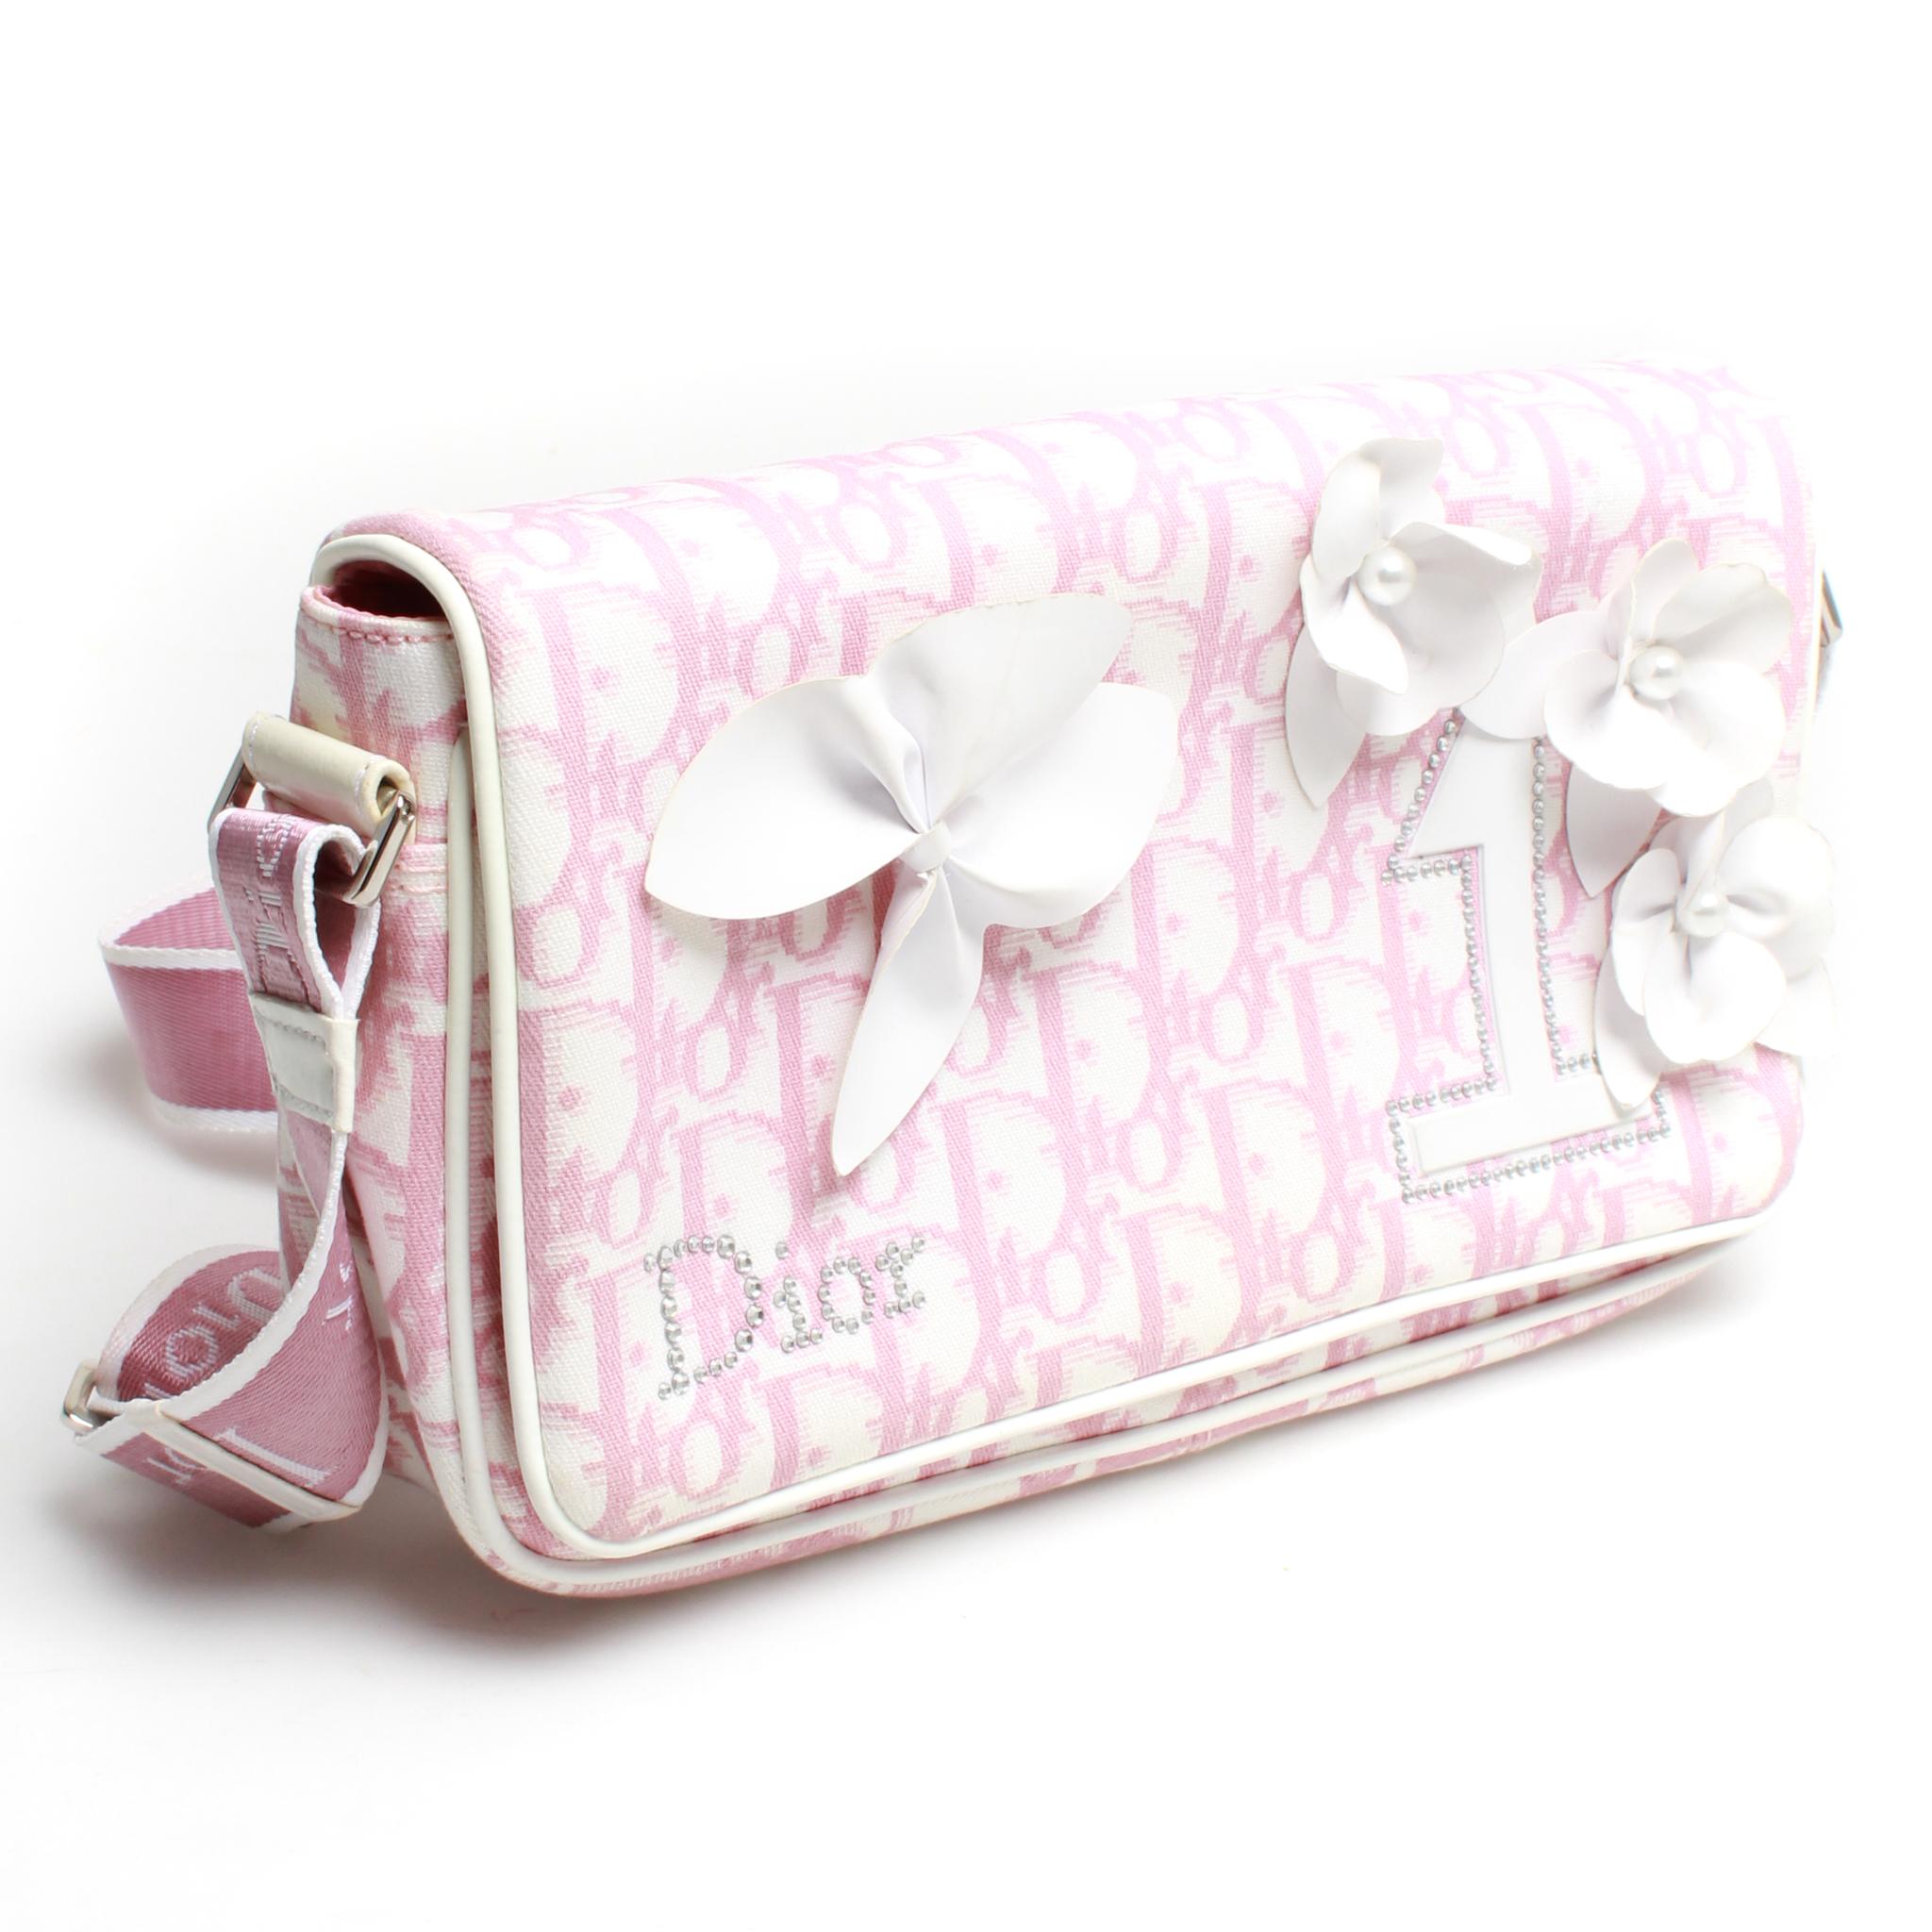 Darling pink and white Diorissimo canvas Christian Dior Girly Reporter cross body bag with front flap and magnetic closure, silver-tone hardware, long adjustable shoulder strap, gorgeous white leather trim, crystal embellishments and floral appliqué